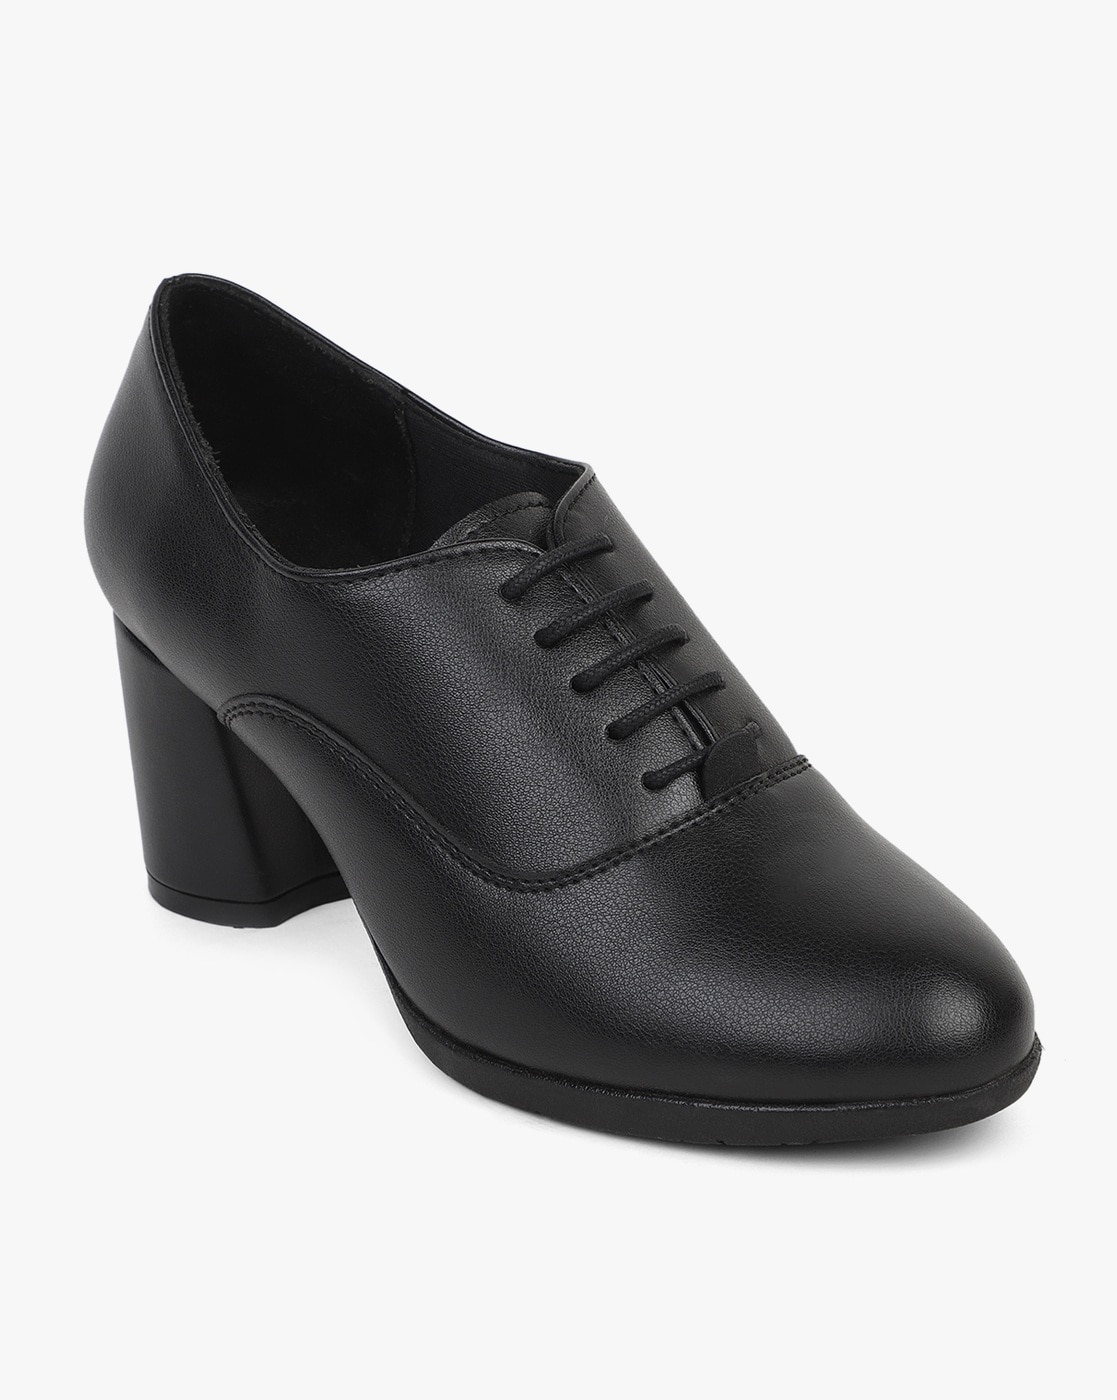 Buy Men's formal shoes online at up to 60% off - Amazon.in